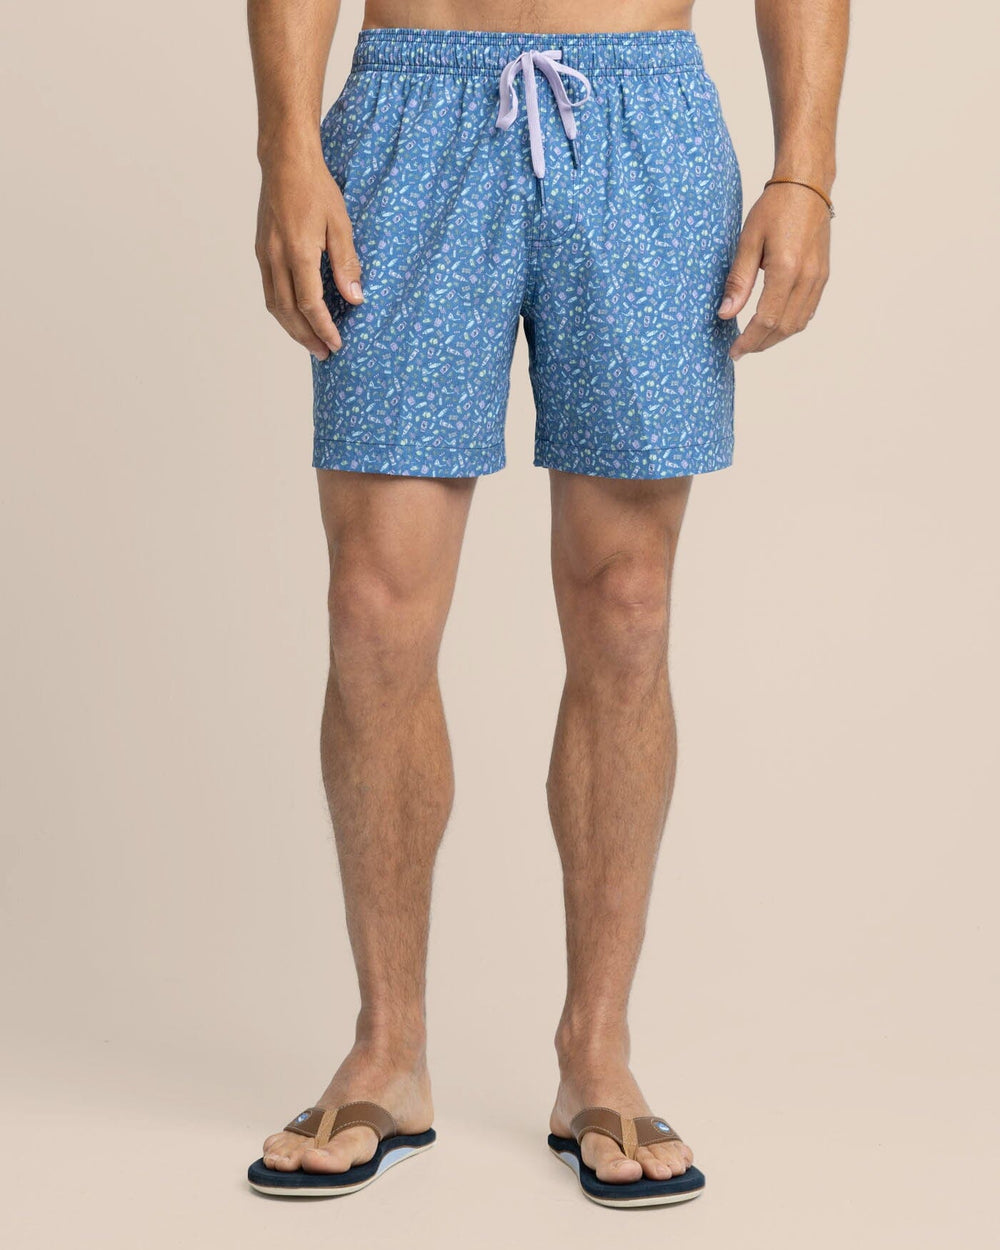 The front view of the Southern Tide Dazed and Transfused Swim Trunk by Southern Tide - Coronet Blue